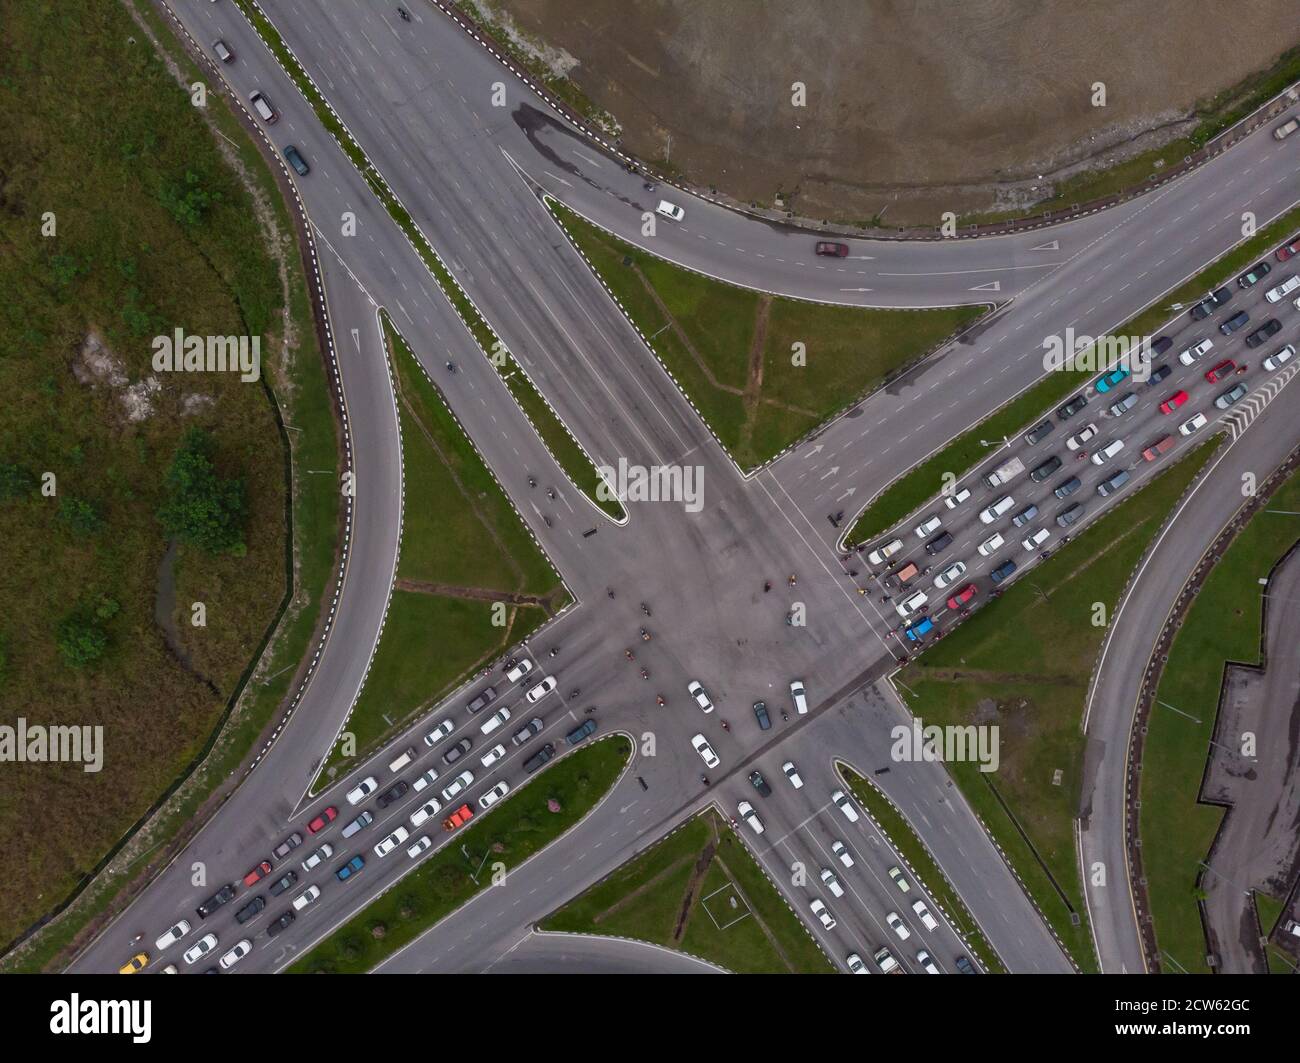 Top down view of road intersection with crowded vehicles Stock Photo ...